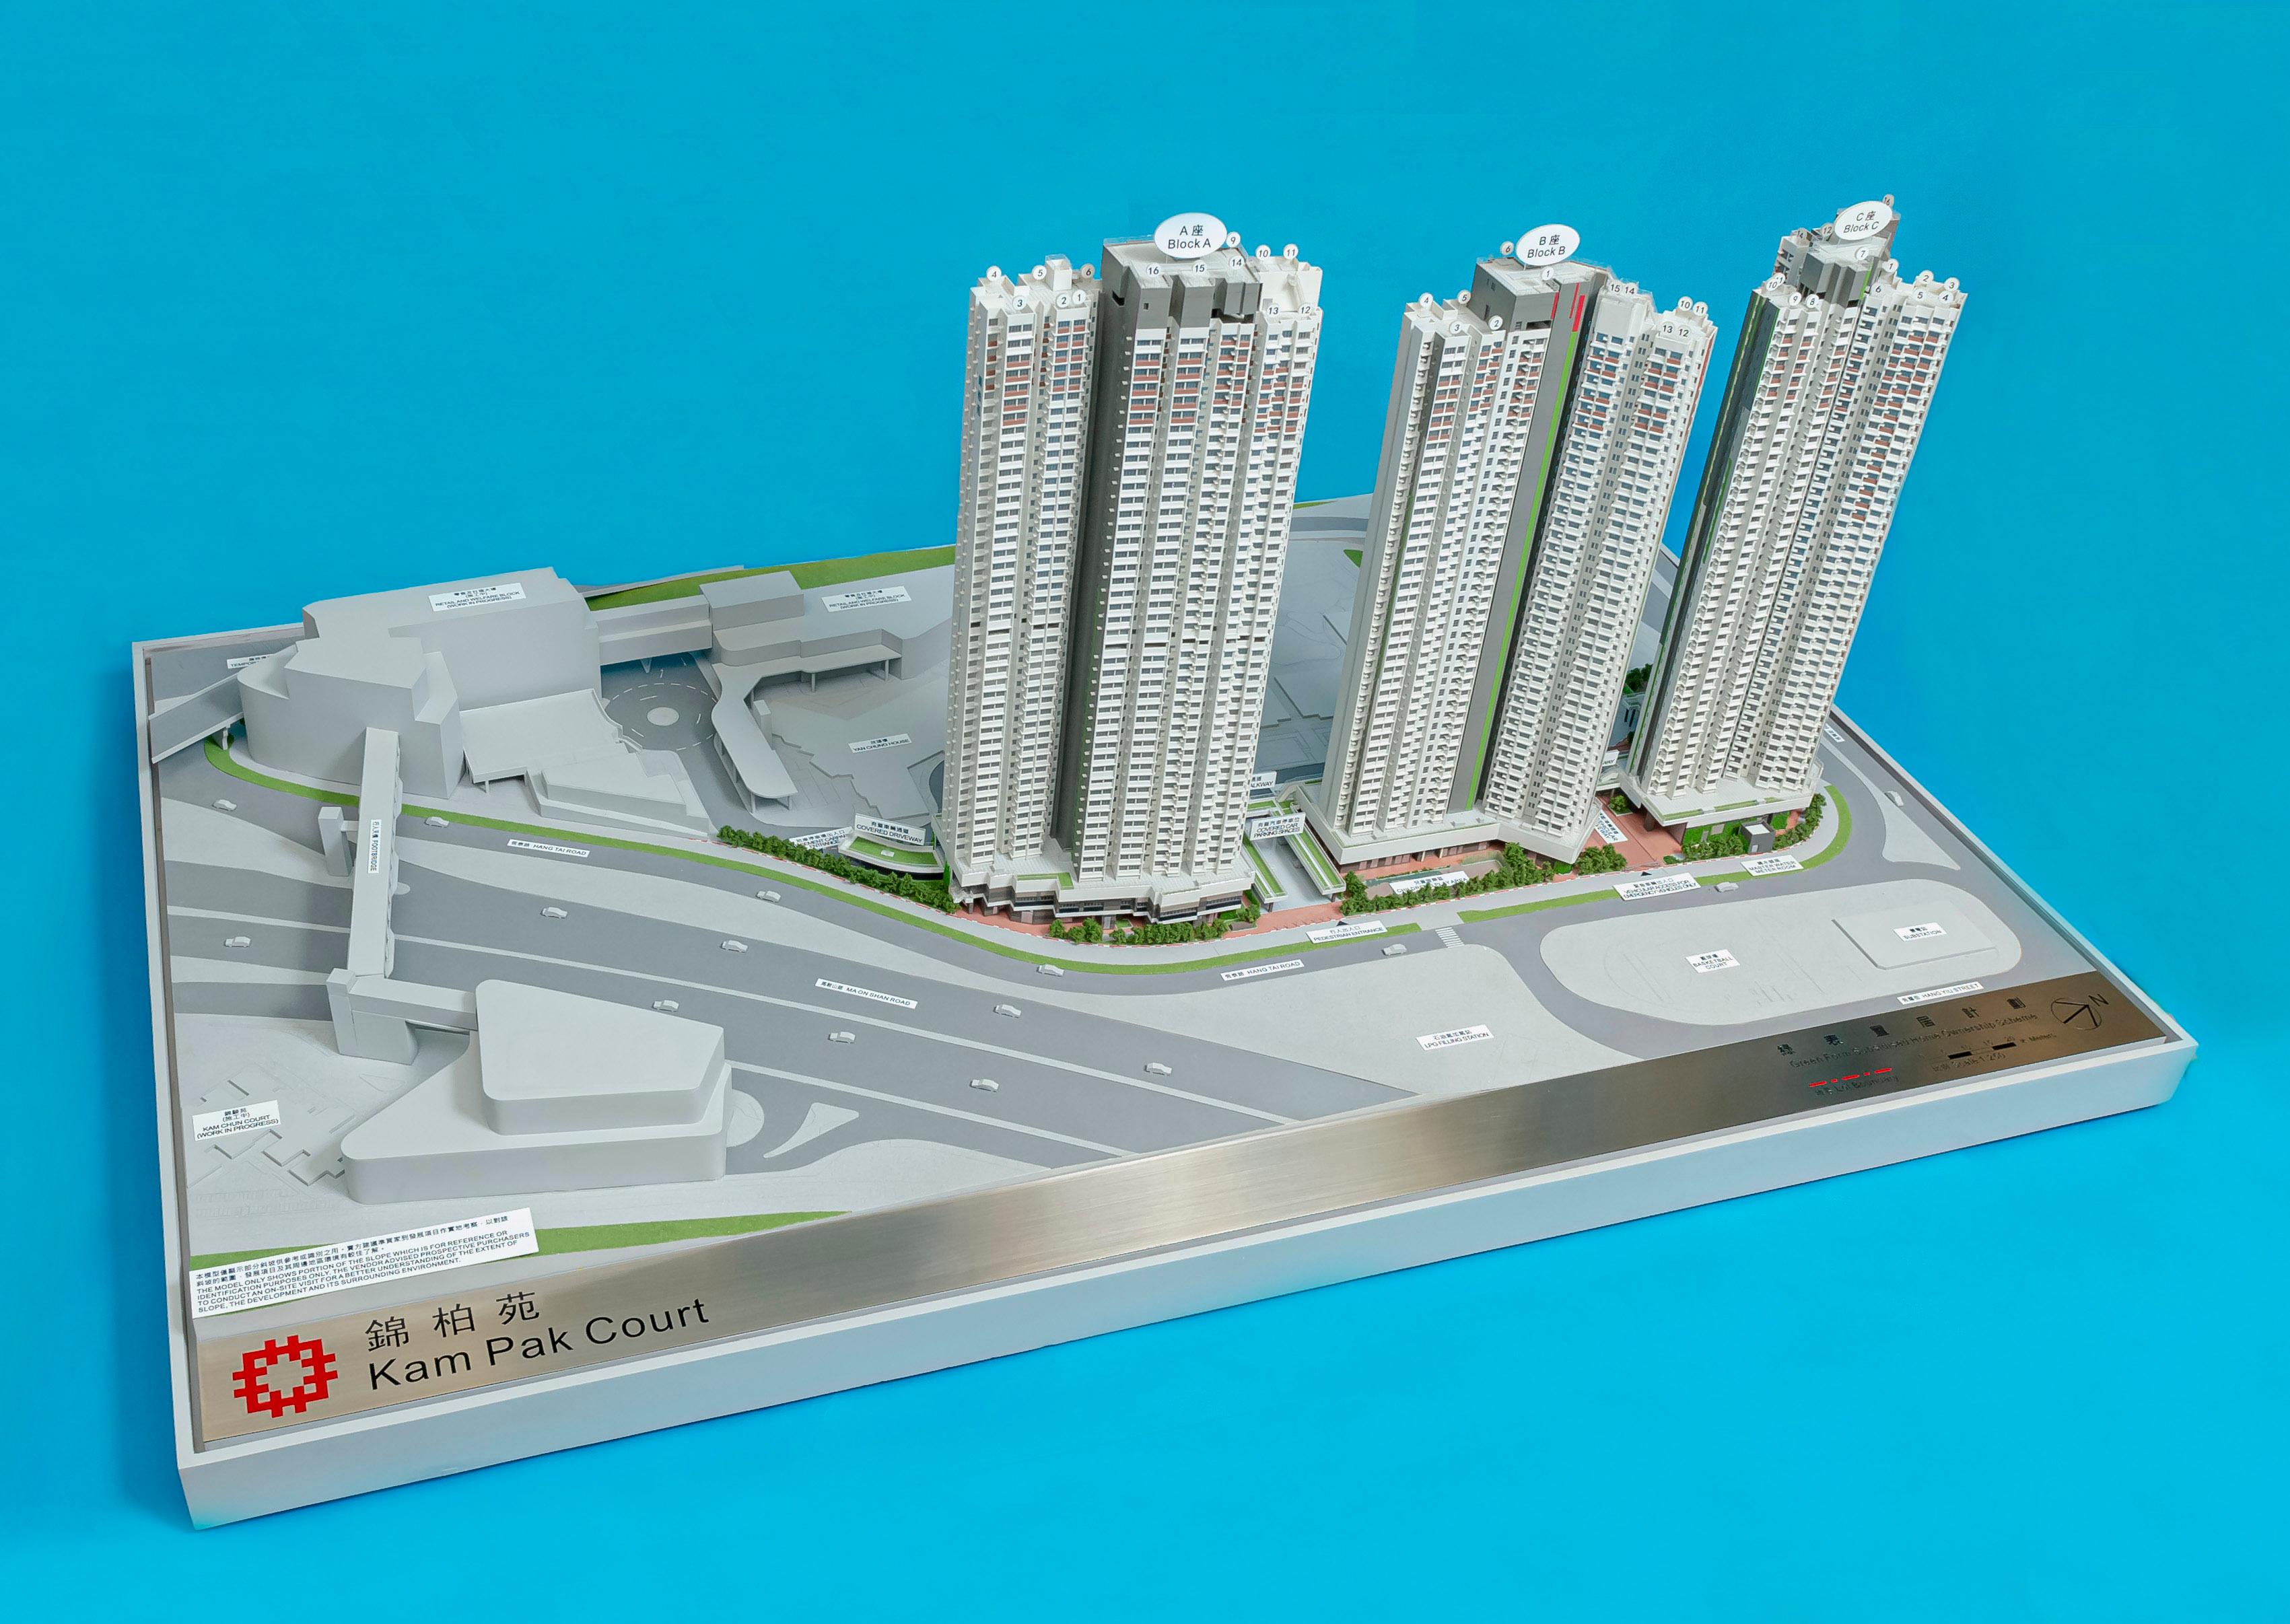 Application for purchase under the Sale of Green Form Subsidised Home Ownership Scheme Flats 2022 will start on September 29. Photo shows a model of Kam Pak Court, a new development project under the scheme.